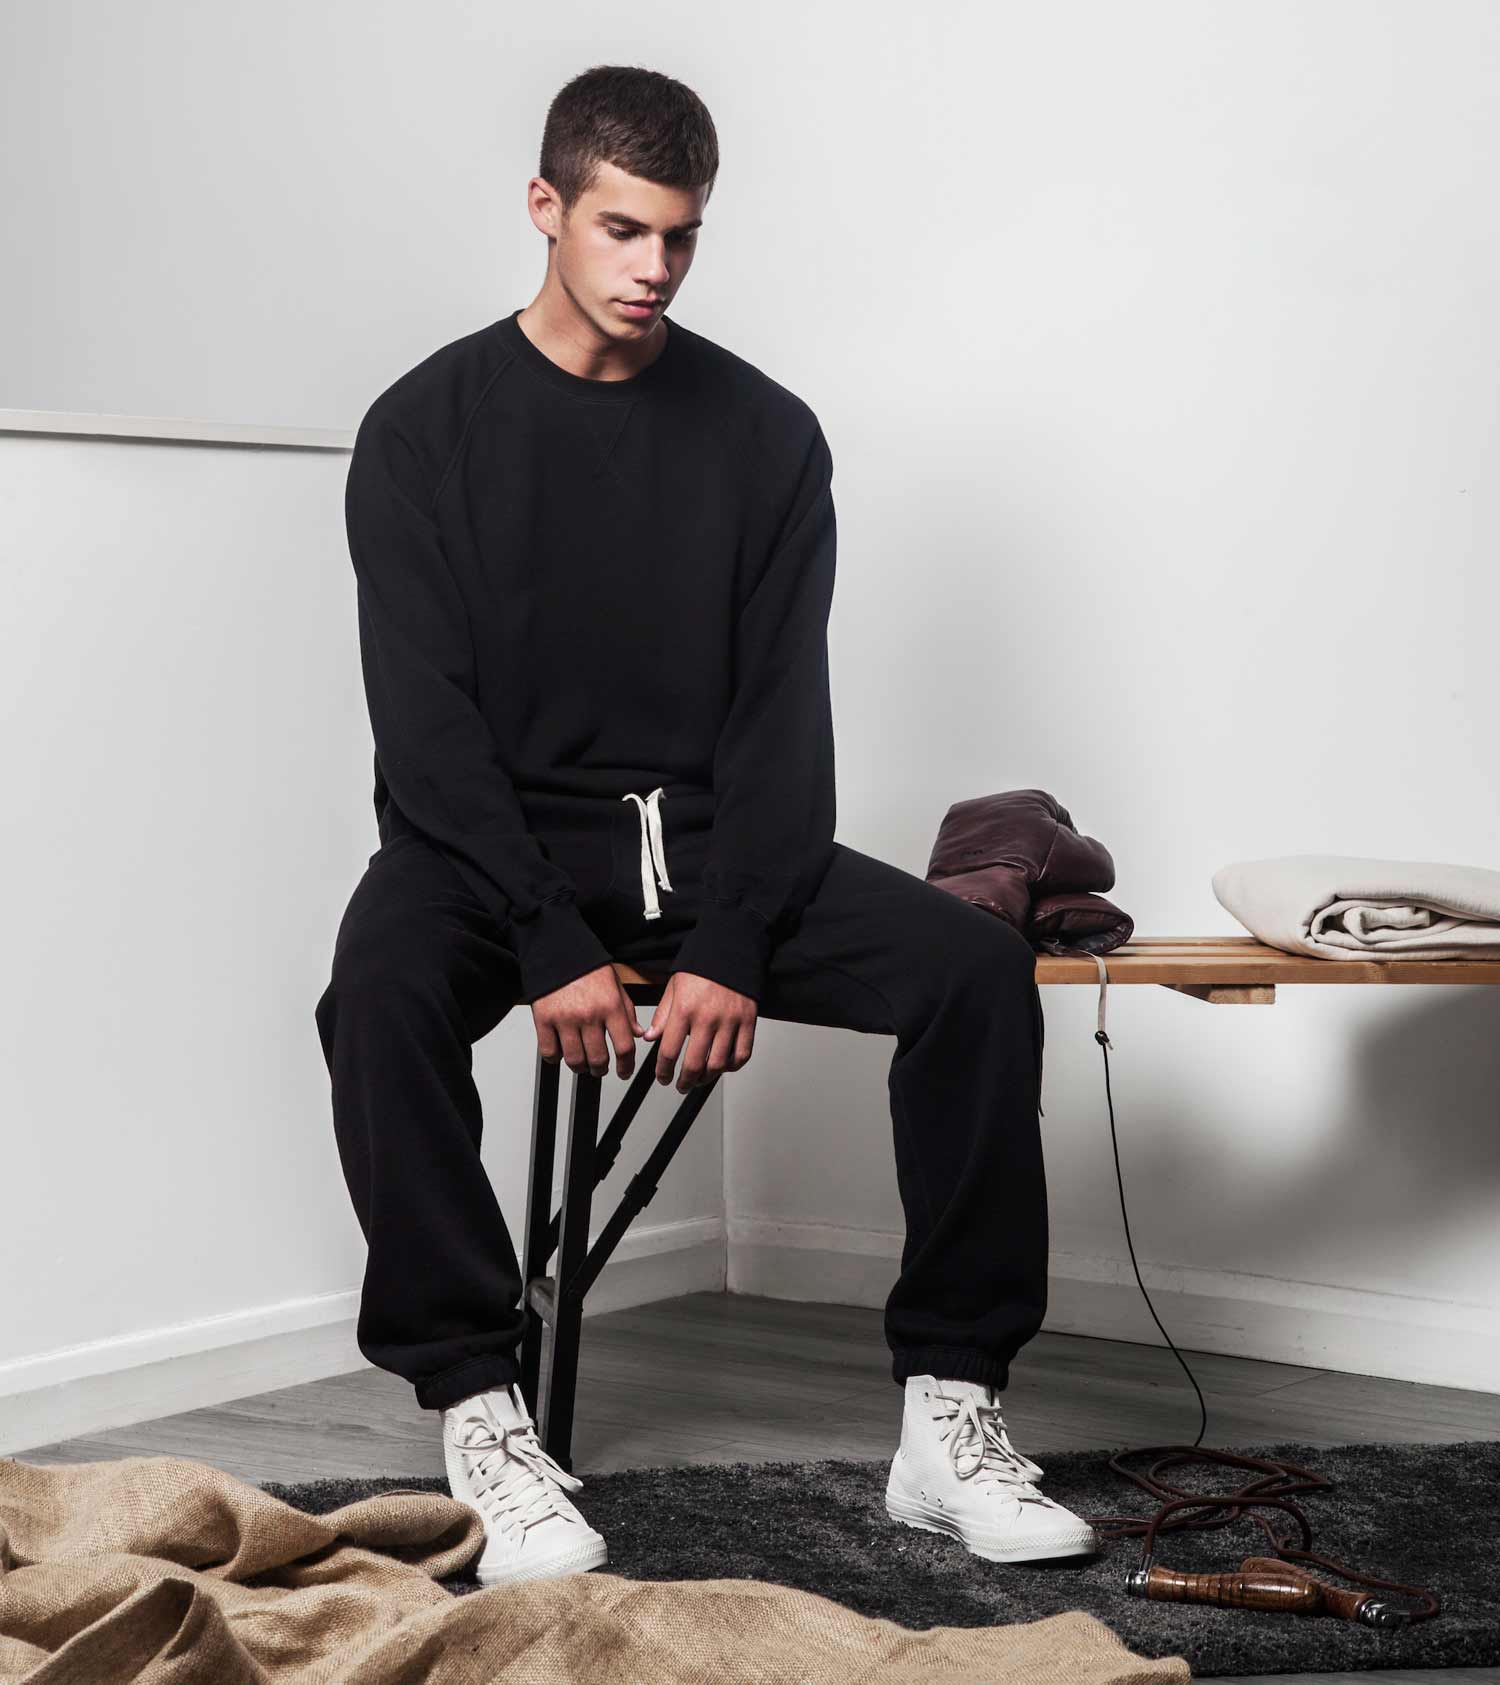 A First Look At The All-New Cole Buxton Collection | OPUMO Magazine